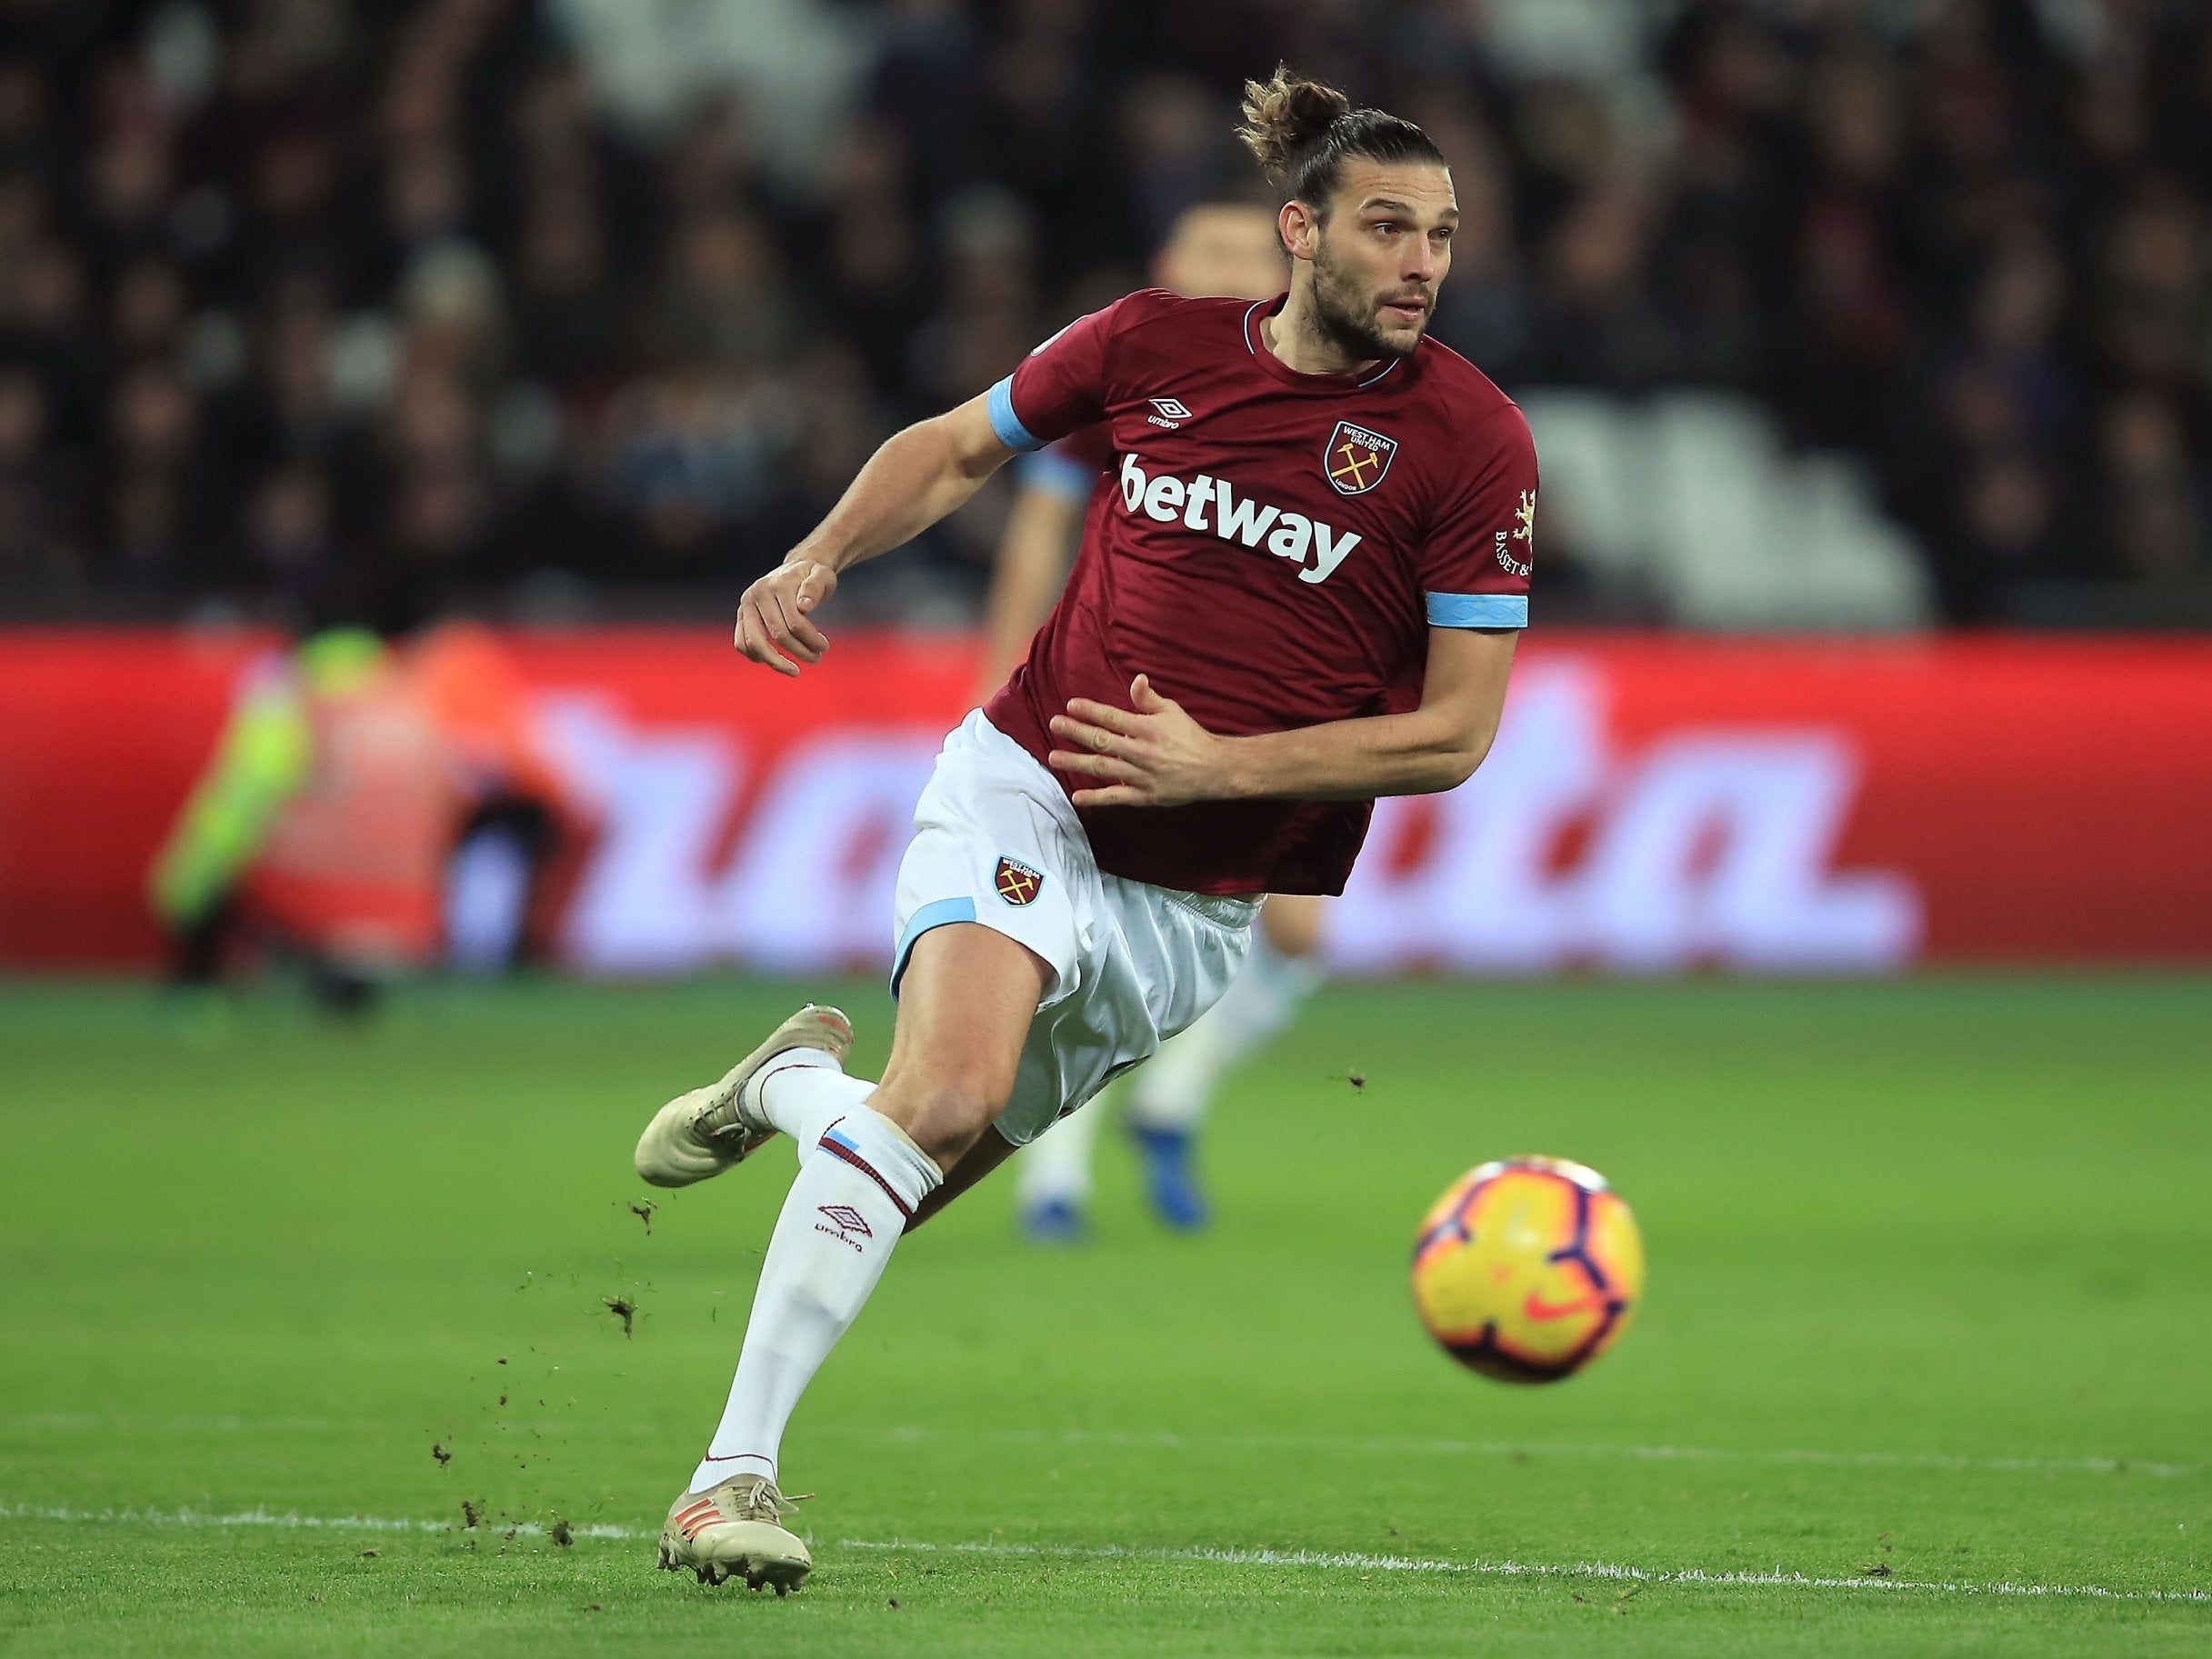 Carroll struggled with injuries during his time at West Ham but returns to his boyhood club